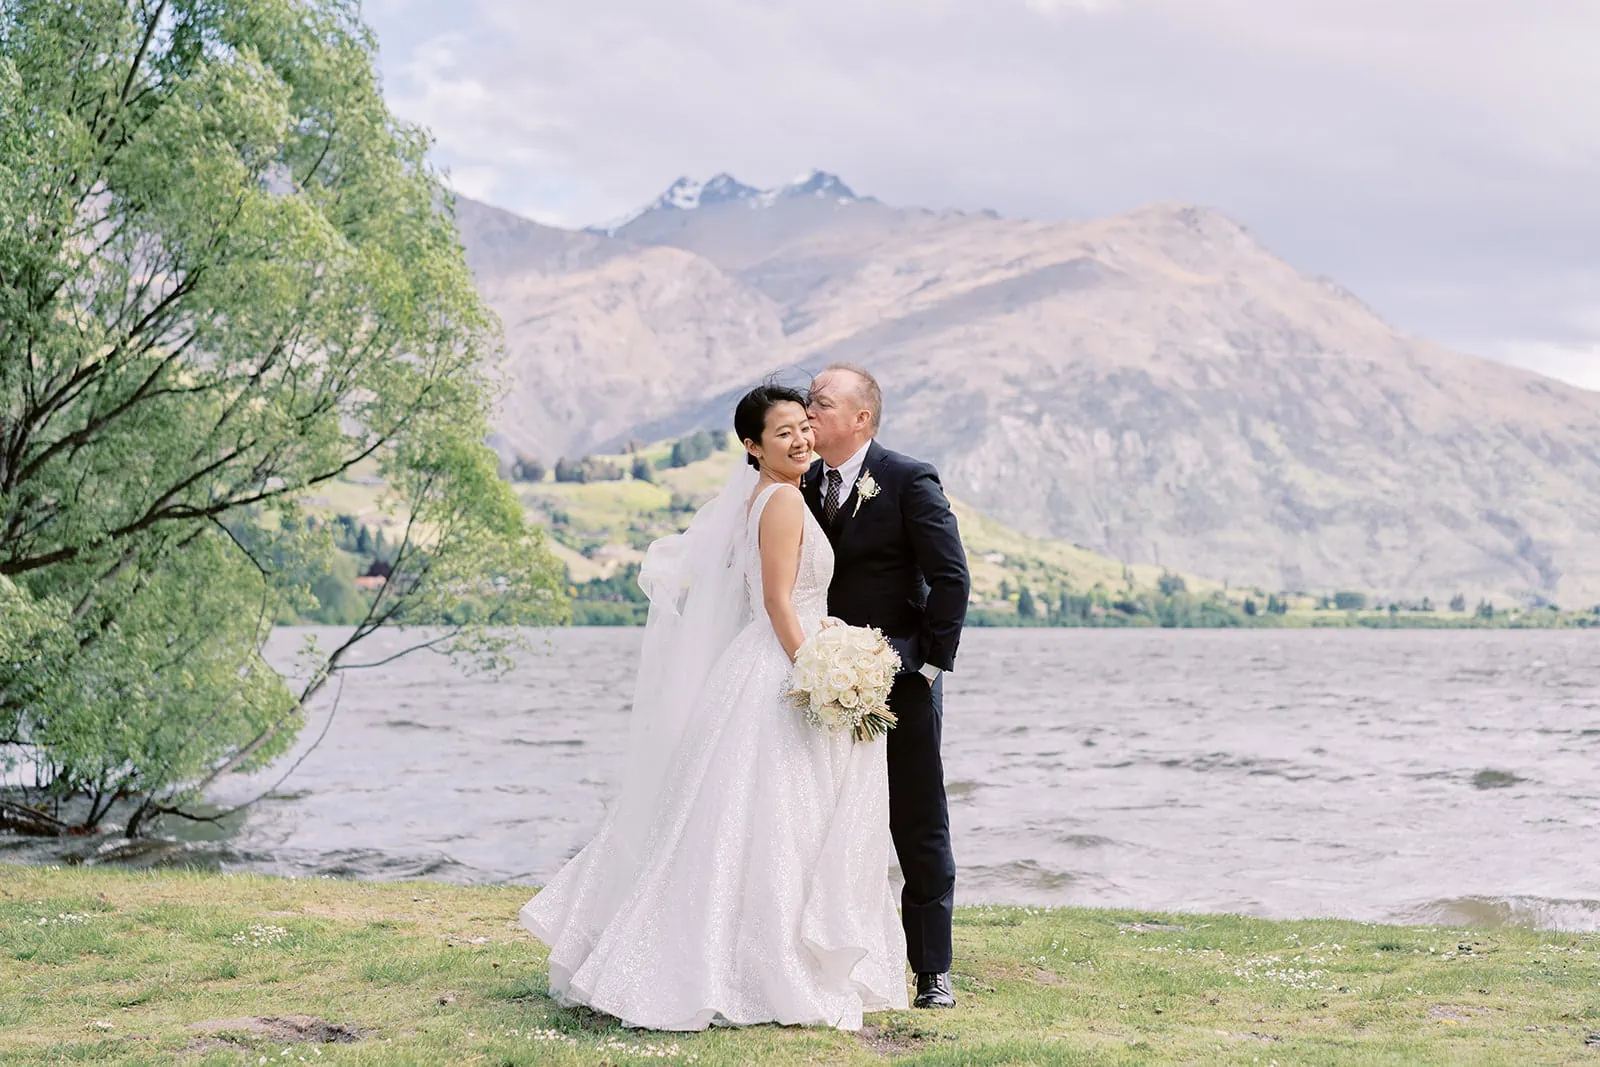 Queenstown Elopement Heli Wedding Photographer クイーンズタウン結婚式 | Joel and Meng, the bride and groom, blissfully stand in front of Stoneridge Estate, with a magnificent lake and majestic mountains as their enchanting backdrop.